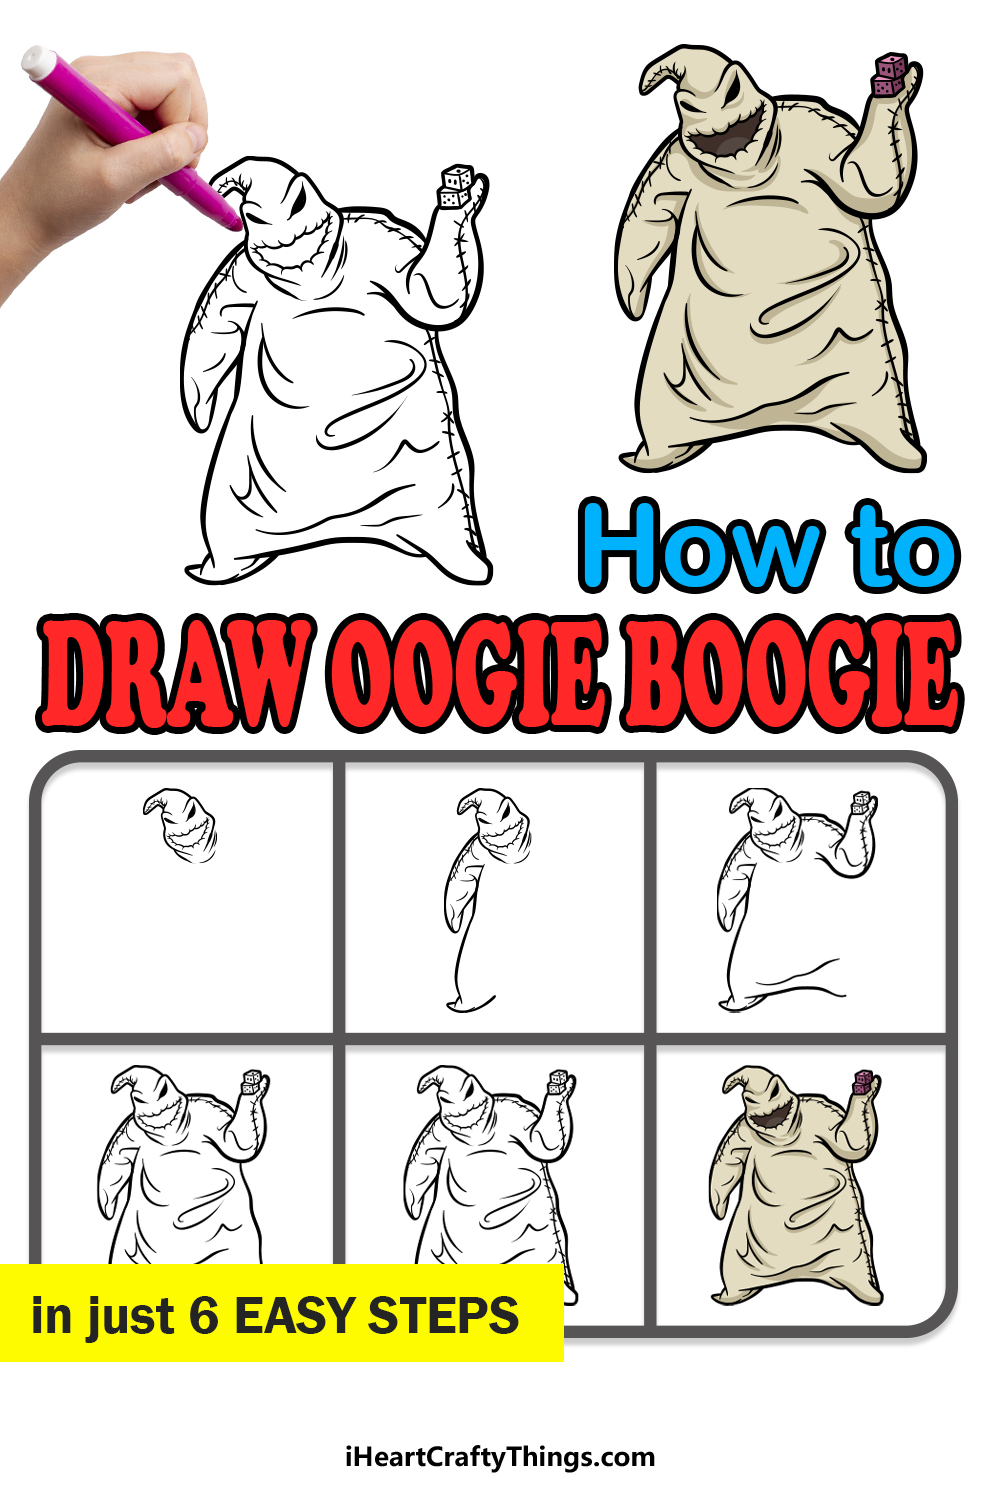 how to draw oogie boogie in 6 easy steps